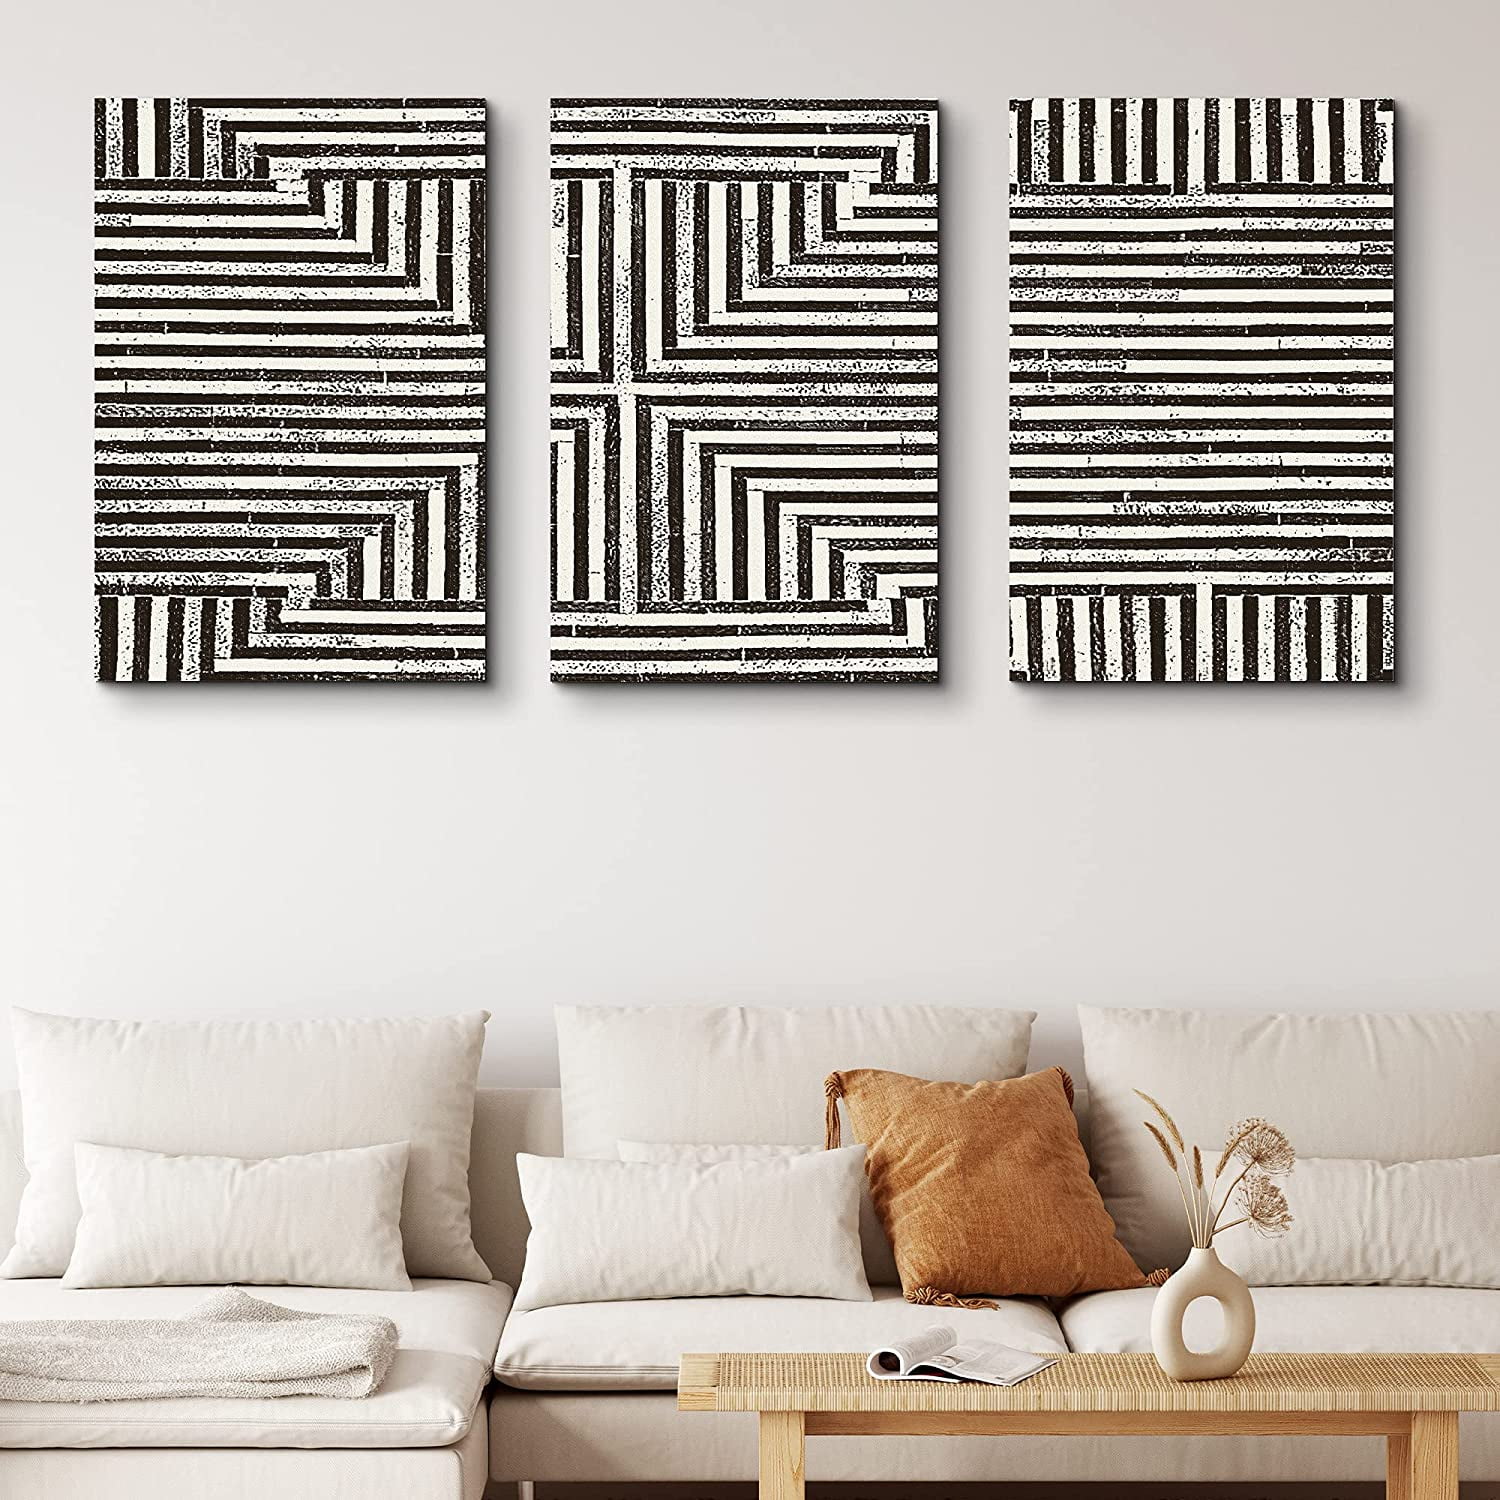 PixonSign Canvas Print Wall Art Set Cross Shaped Line Pattern Geometric  Shapes Illustrations Modern Art Contemporary Edgy Dark Black and White for Living  Room, Bedroom, Office 24